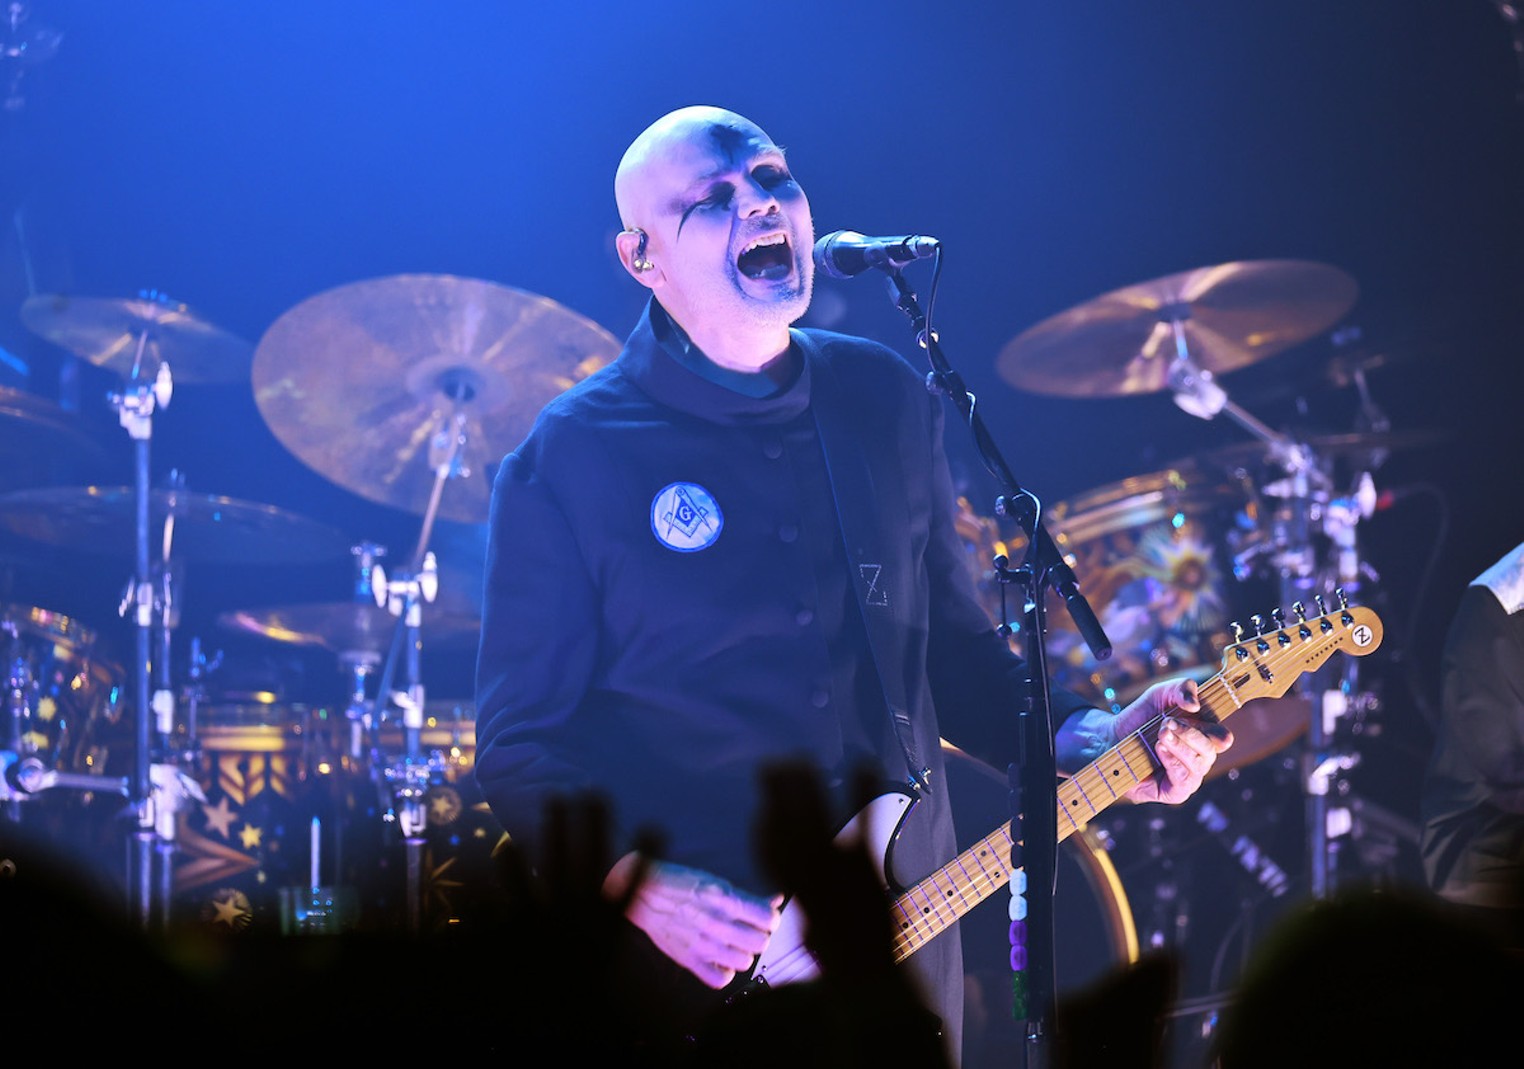 Smashing Pumpkins, Jane's Addiction tour a double dose of rock that has  endured for decades - Chicago Sun-Times